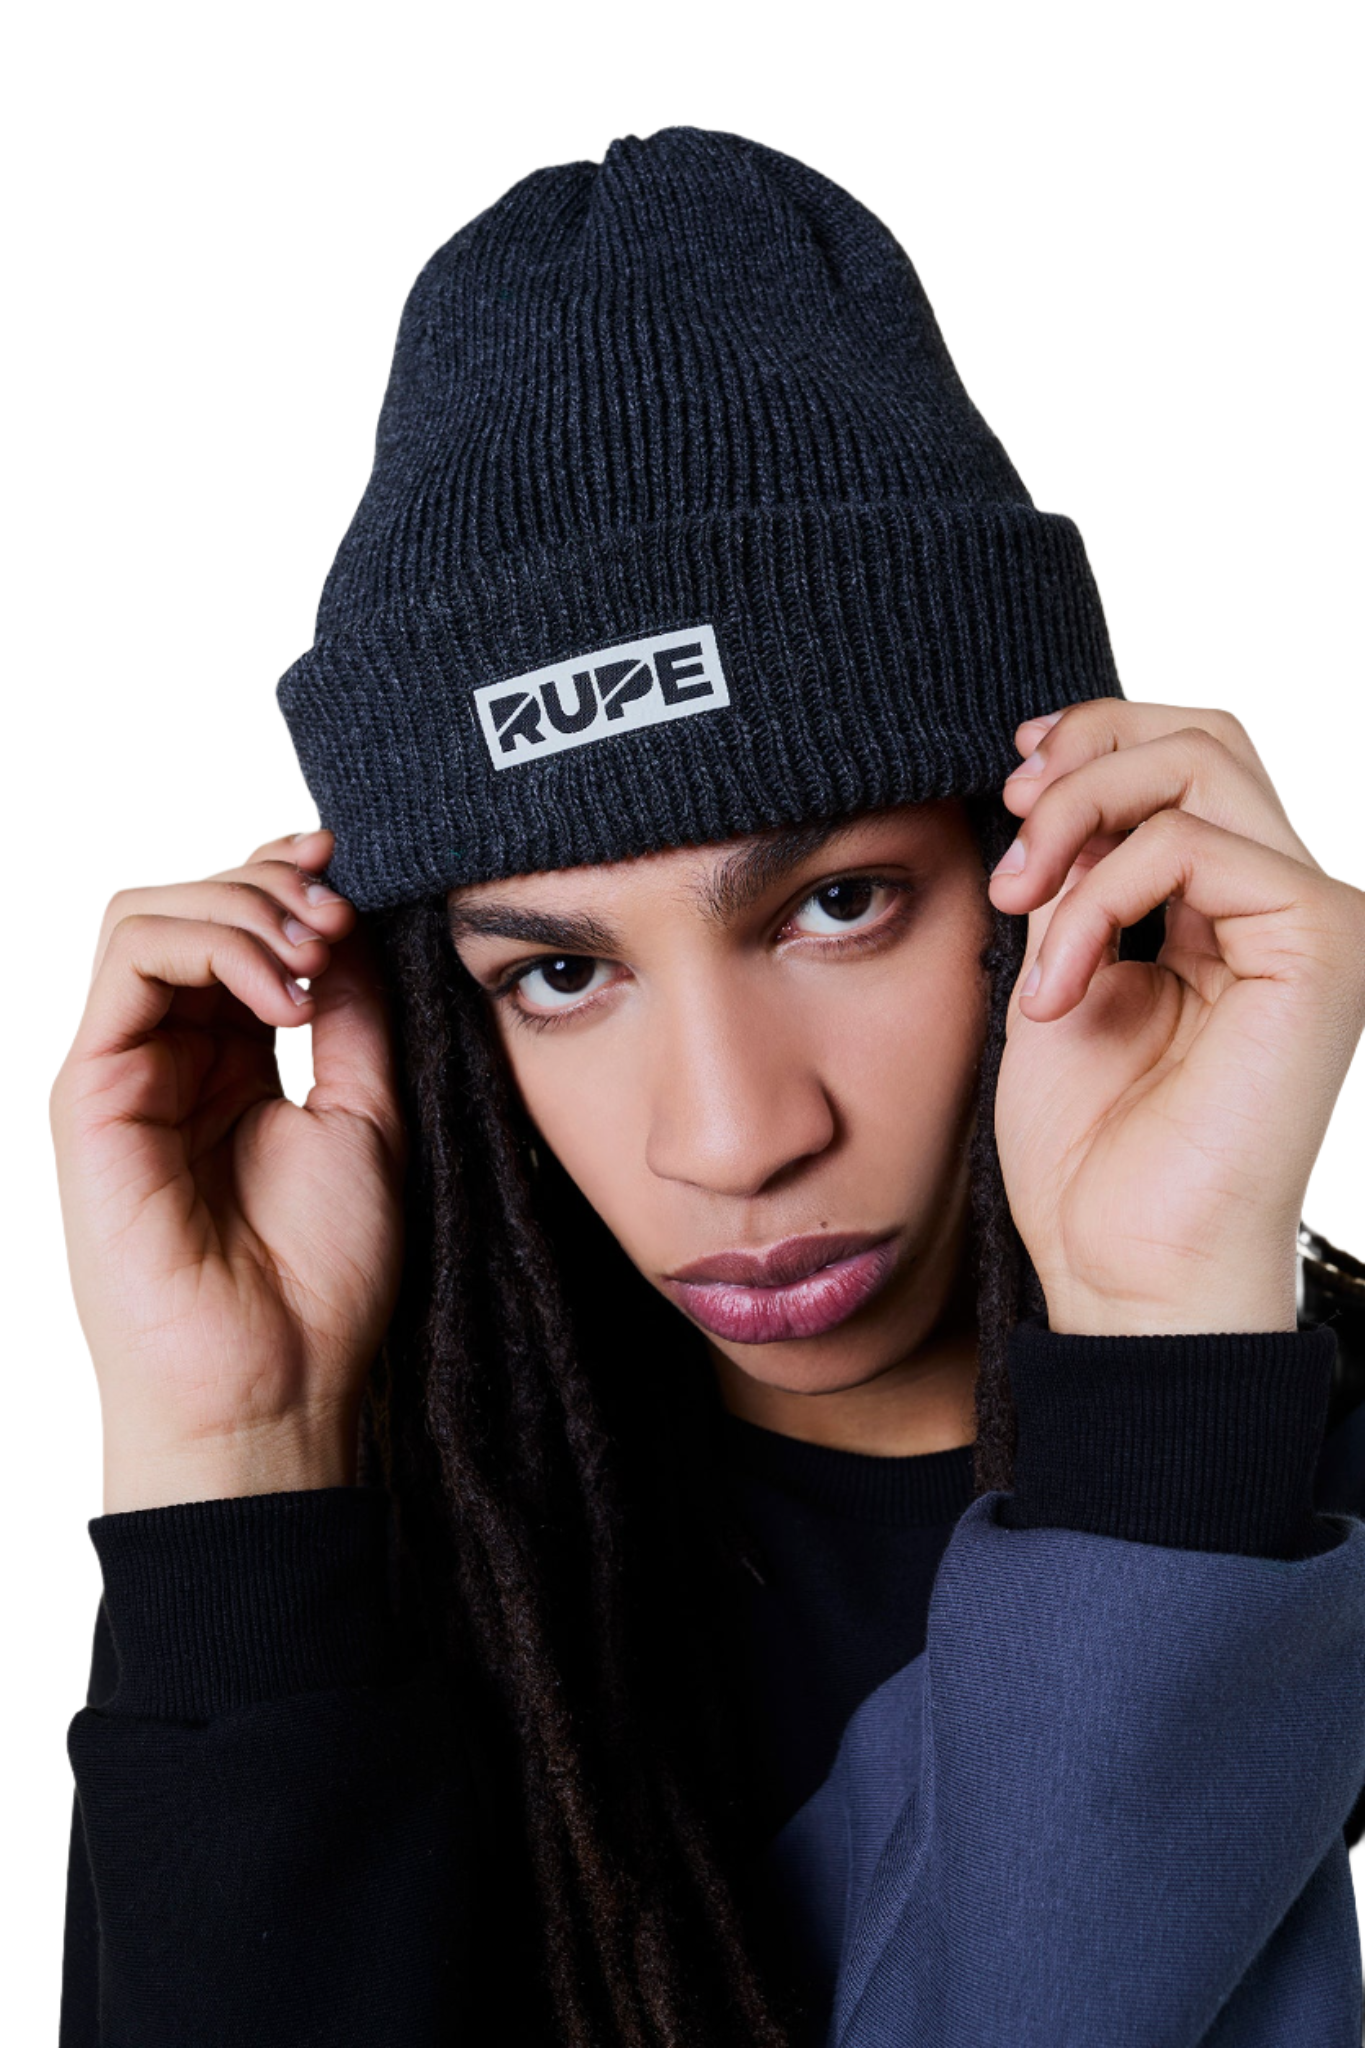 Sheep Rupe Beanie Hat by Brazz - Anthracite